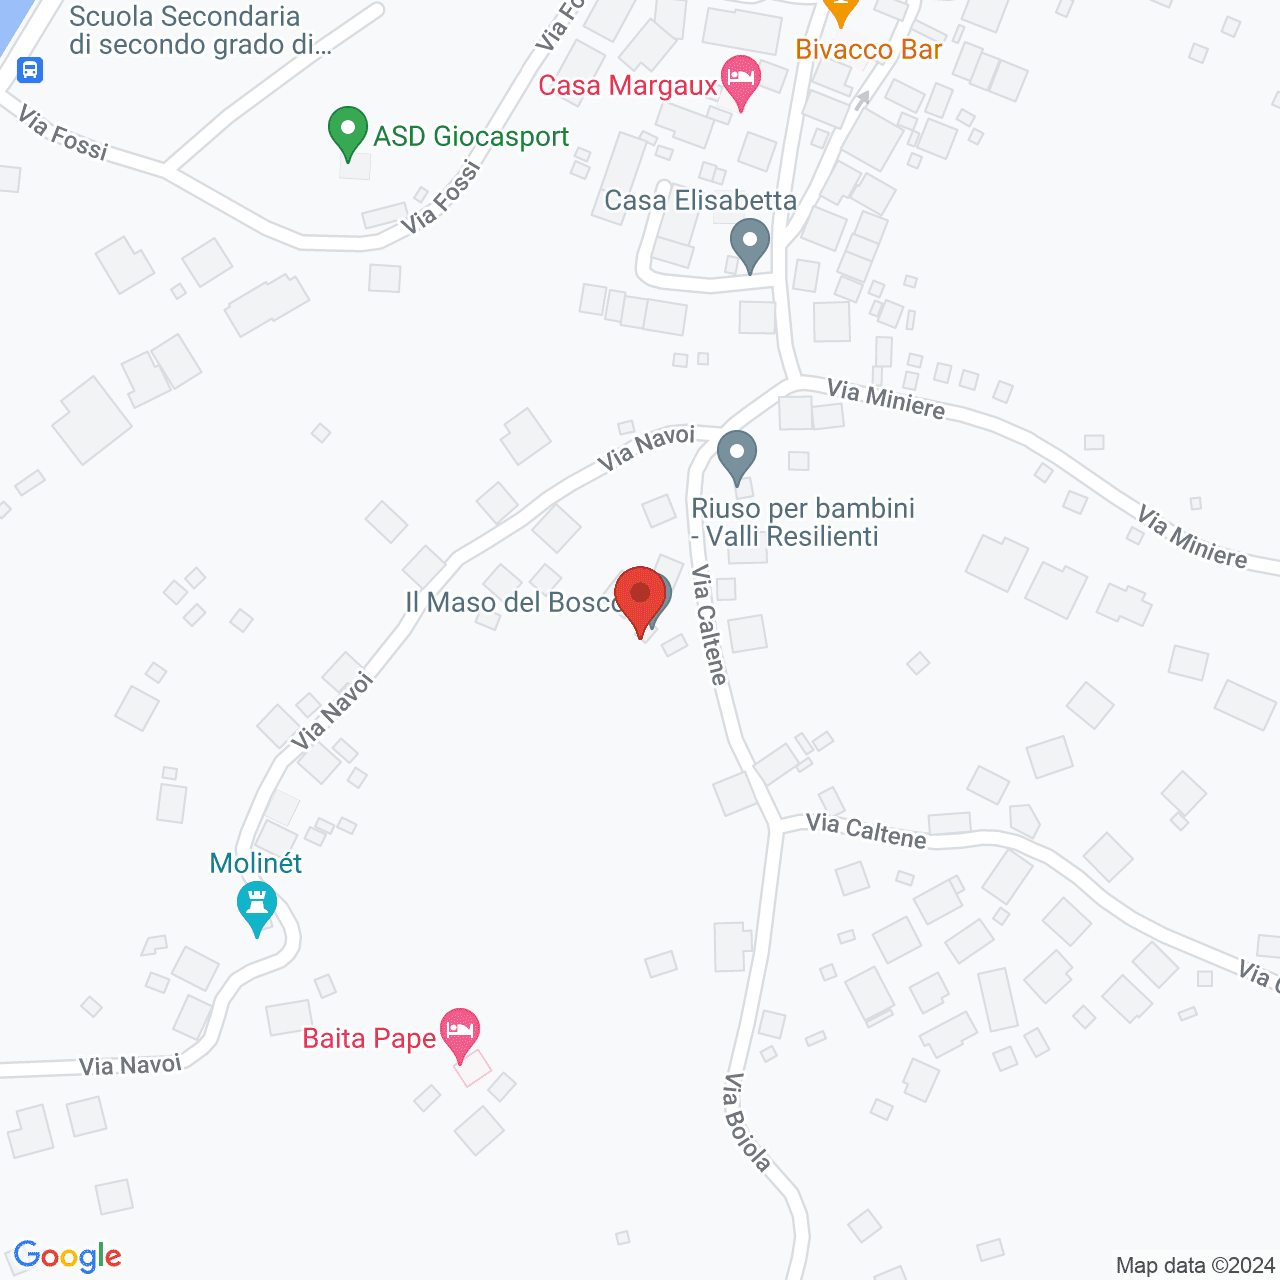 https://maps.googleapis.com/maps/api/staticmap?zoom=10&maptype=hybrid&scale=4&center=46.1712685,11.8329147&markers=color:red%7C%7C46.1712685,11.8329147&size=1000x1000&key=AIzaSyAQg6Liu52-a7wn17F9B-5c4QmJ9kTO3Mo